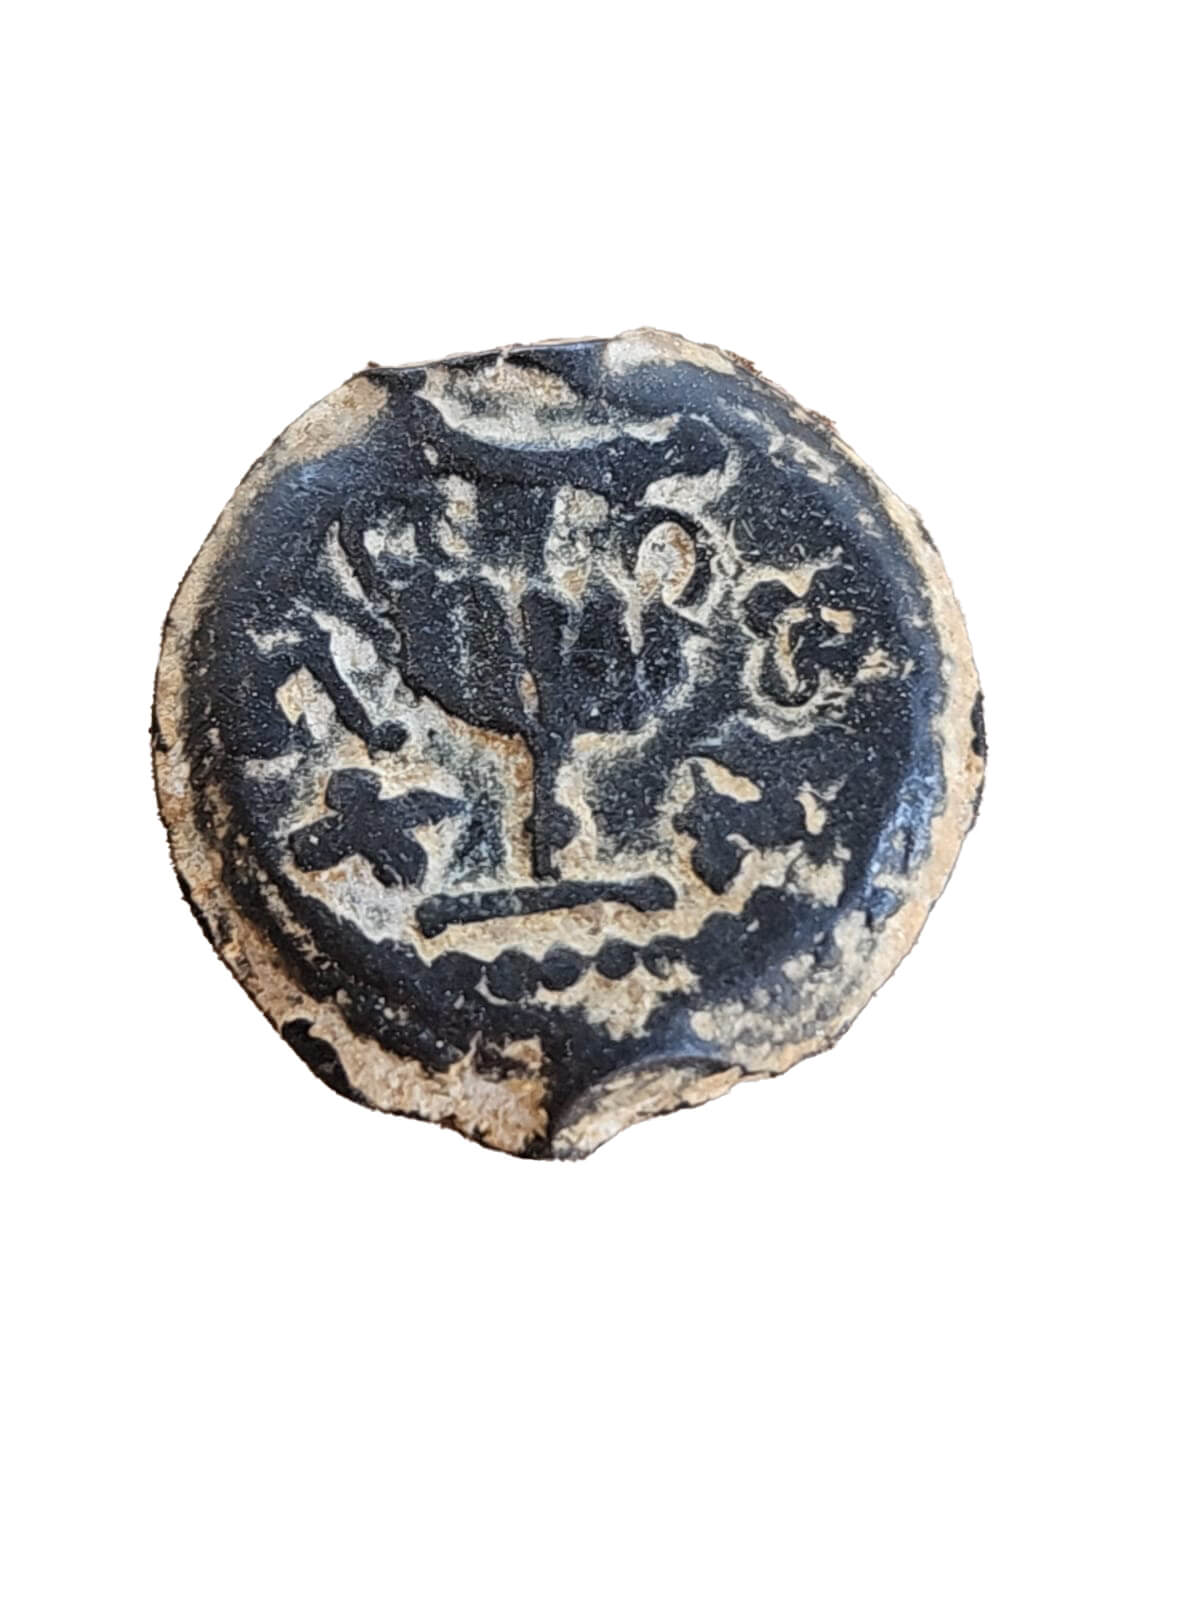 Sub-coin B for the revolt of the Jews against the Romans found in the foundations of the Amma. Photo by Ofer Shion, Israel Antiquities Authority